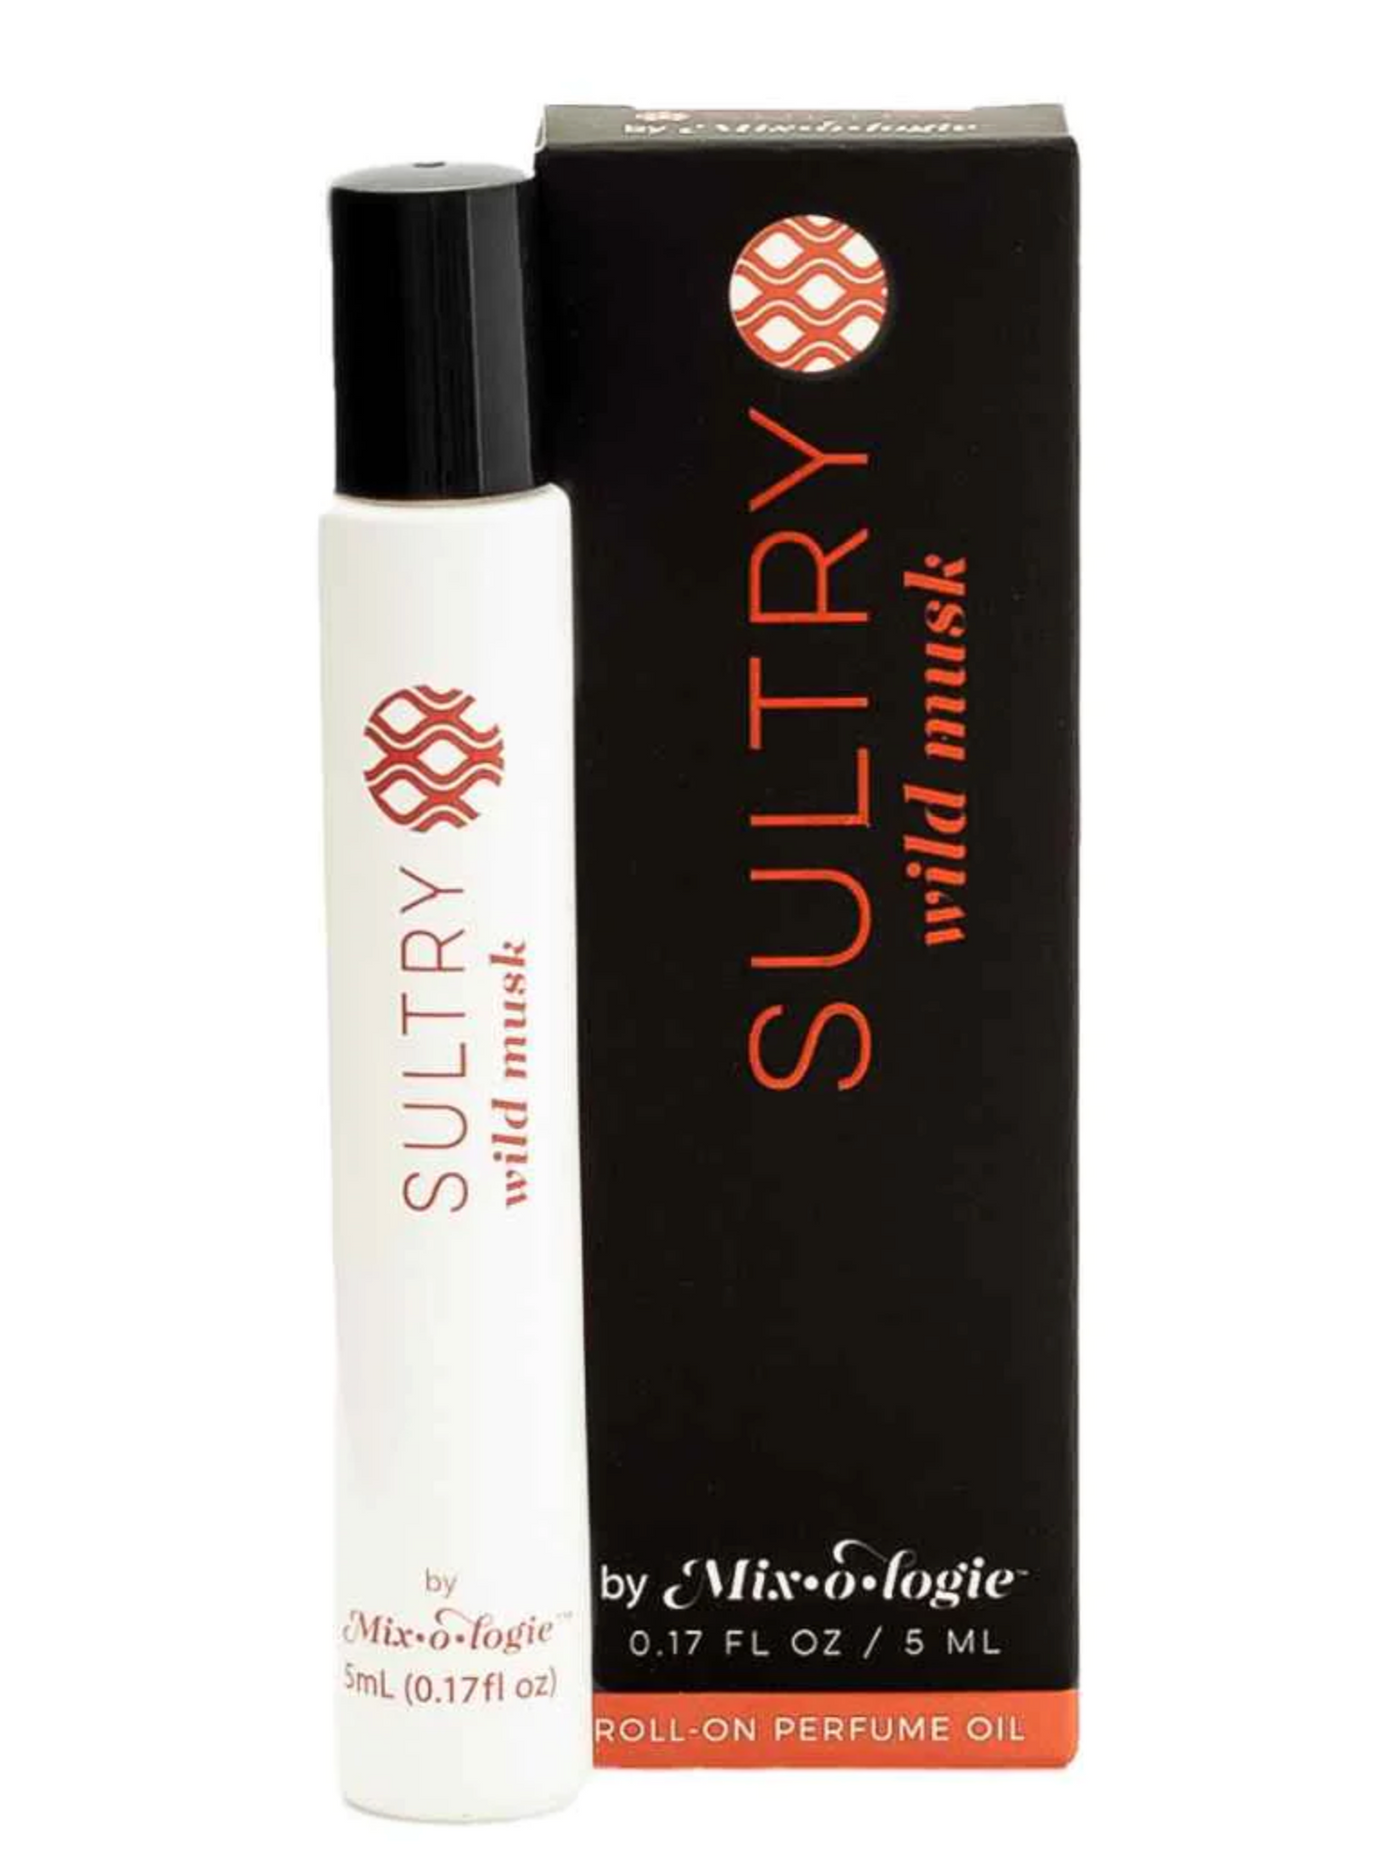 Sultry (Wild Musk) Rollerball Perfume